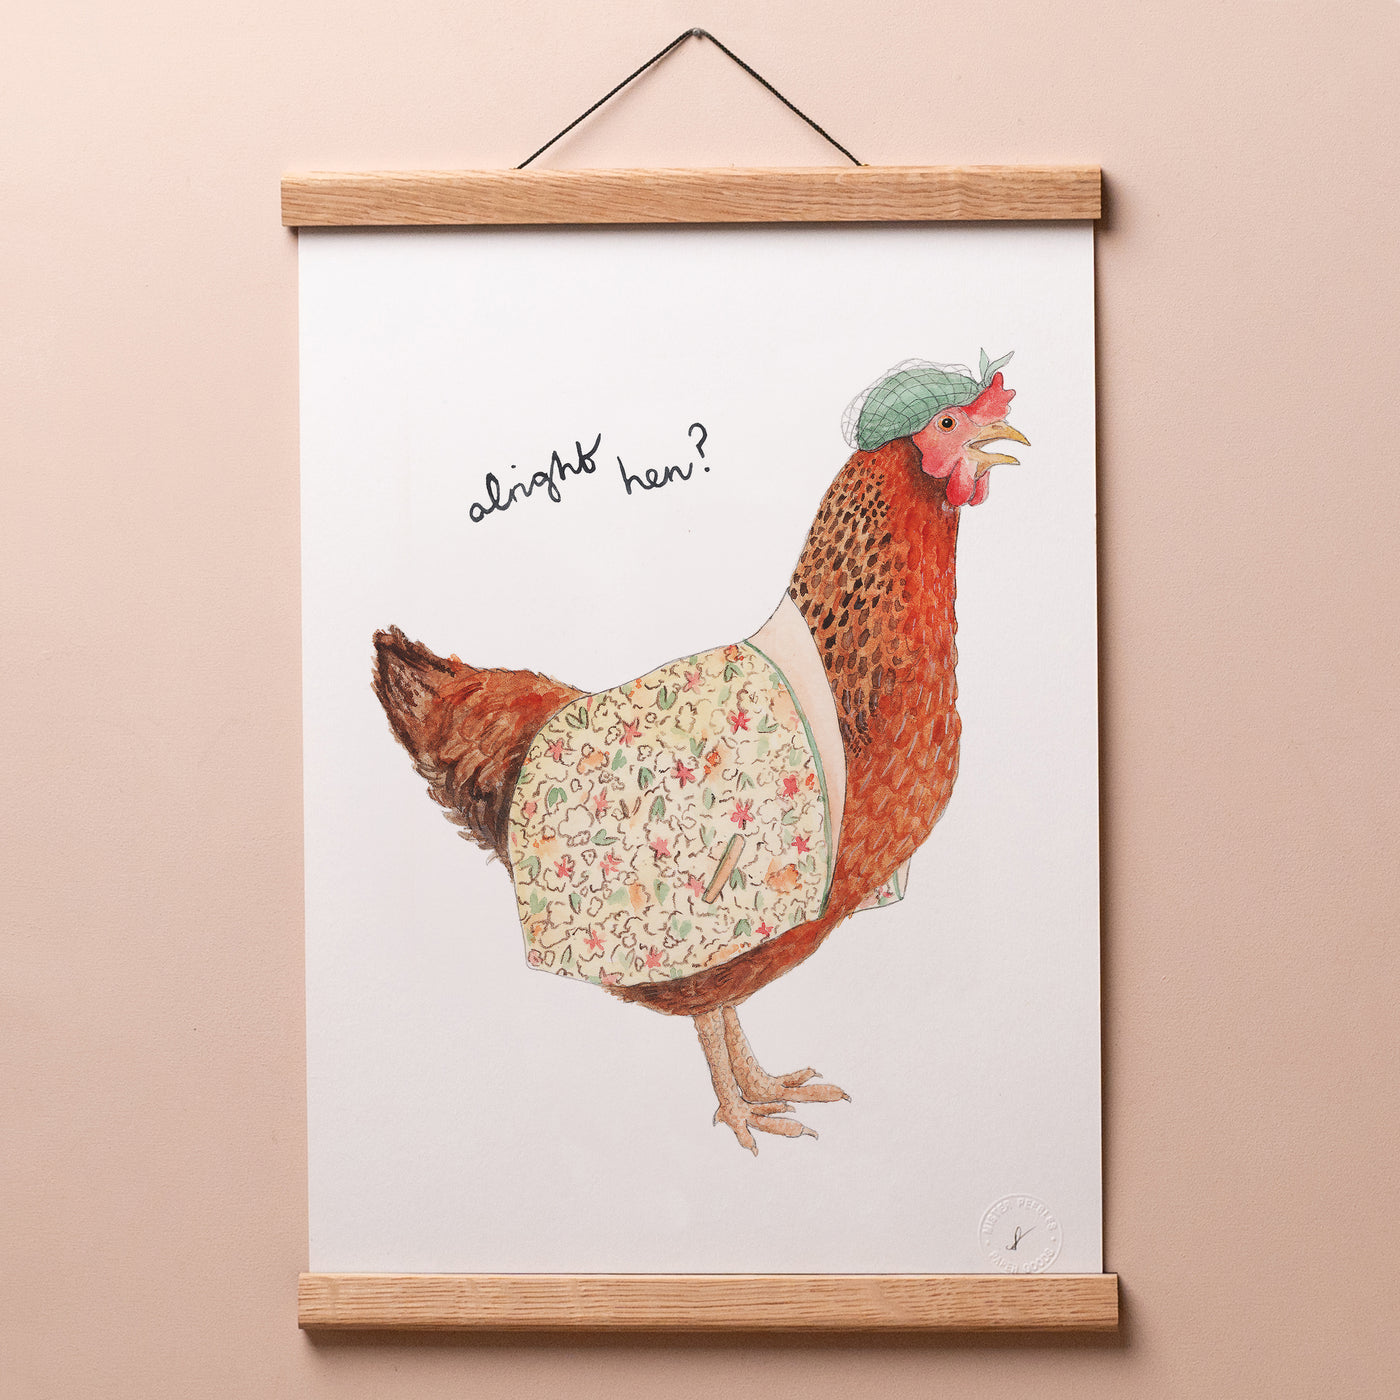 Alright Hen print in a wooden hanger frame on a pink wall